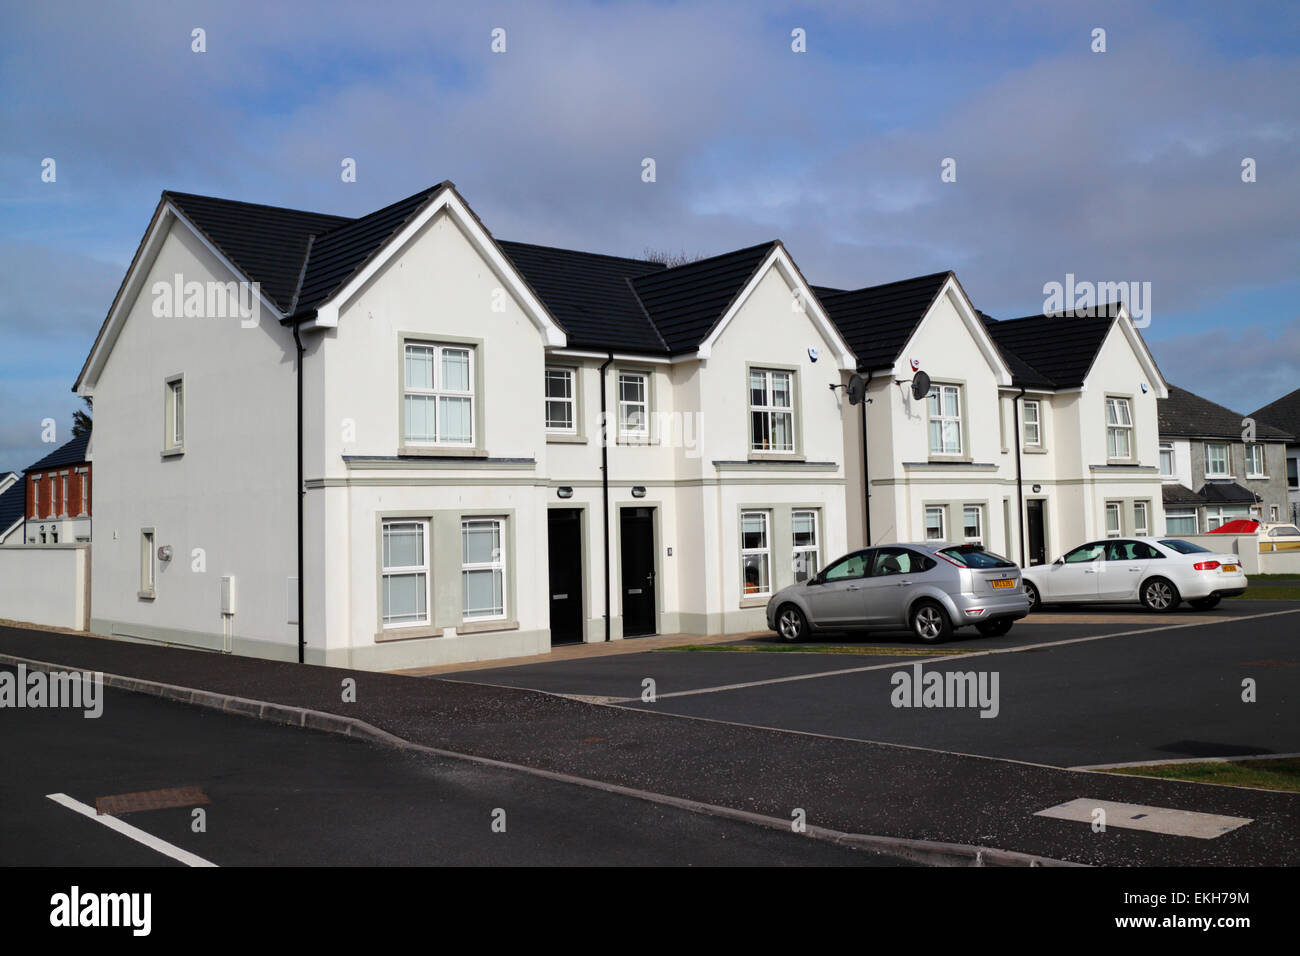 northern ireland new build semi detached properties with parking spaces in a new development Stock Photo